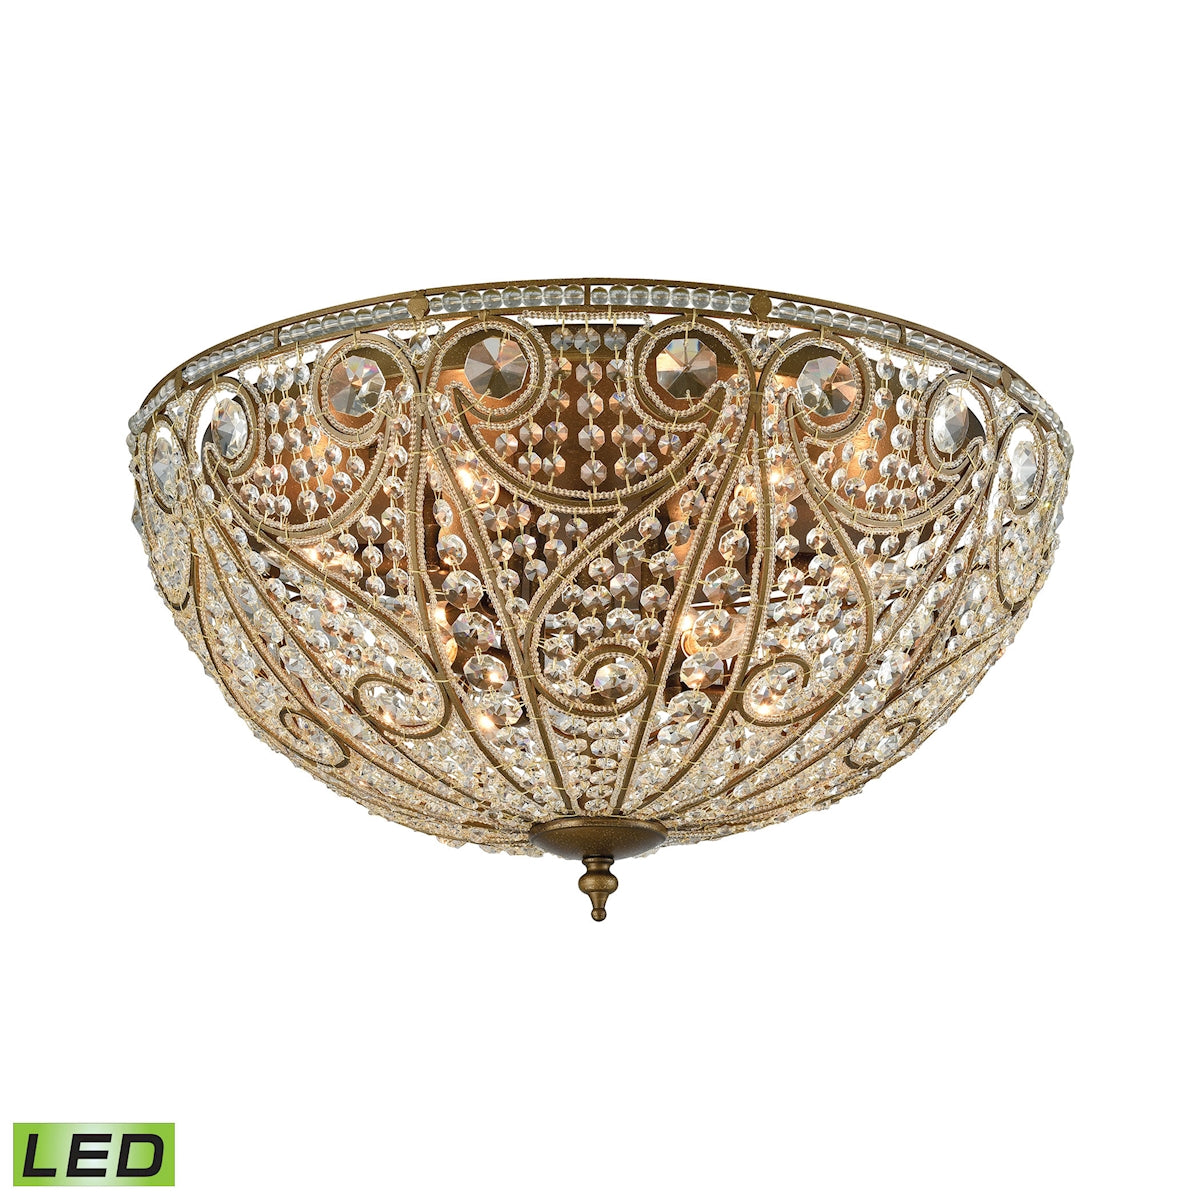 Elizabethan 10-Light Flush Mount in Dark Bronze with Clear Crystal - Includes LED Bulbs